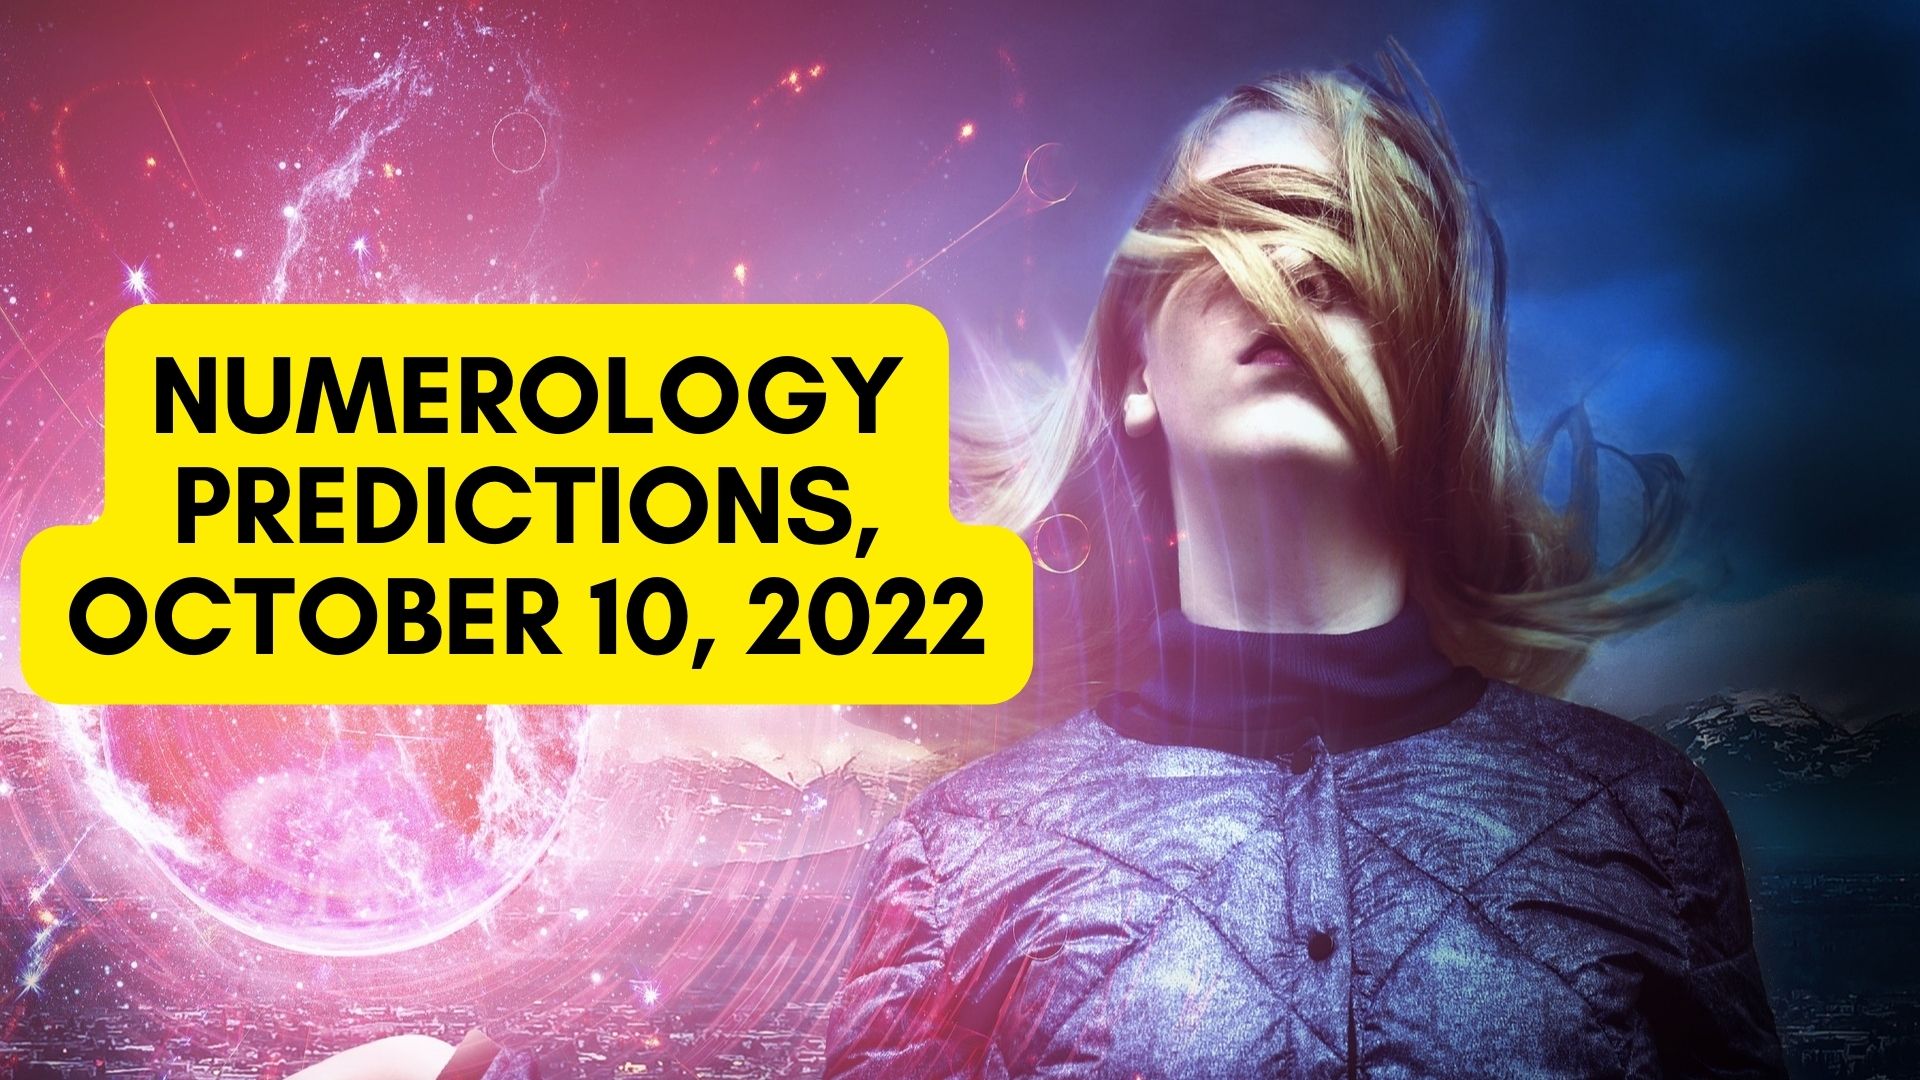 Numerology Predictions, October 10, 2022 - Check Out Your Lucky Numbers And Other Details